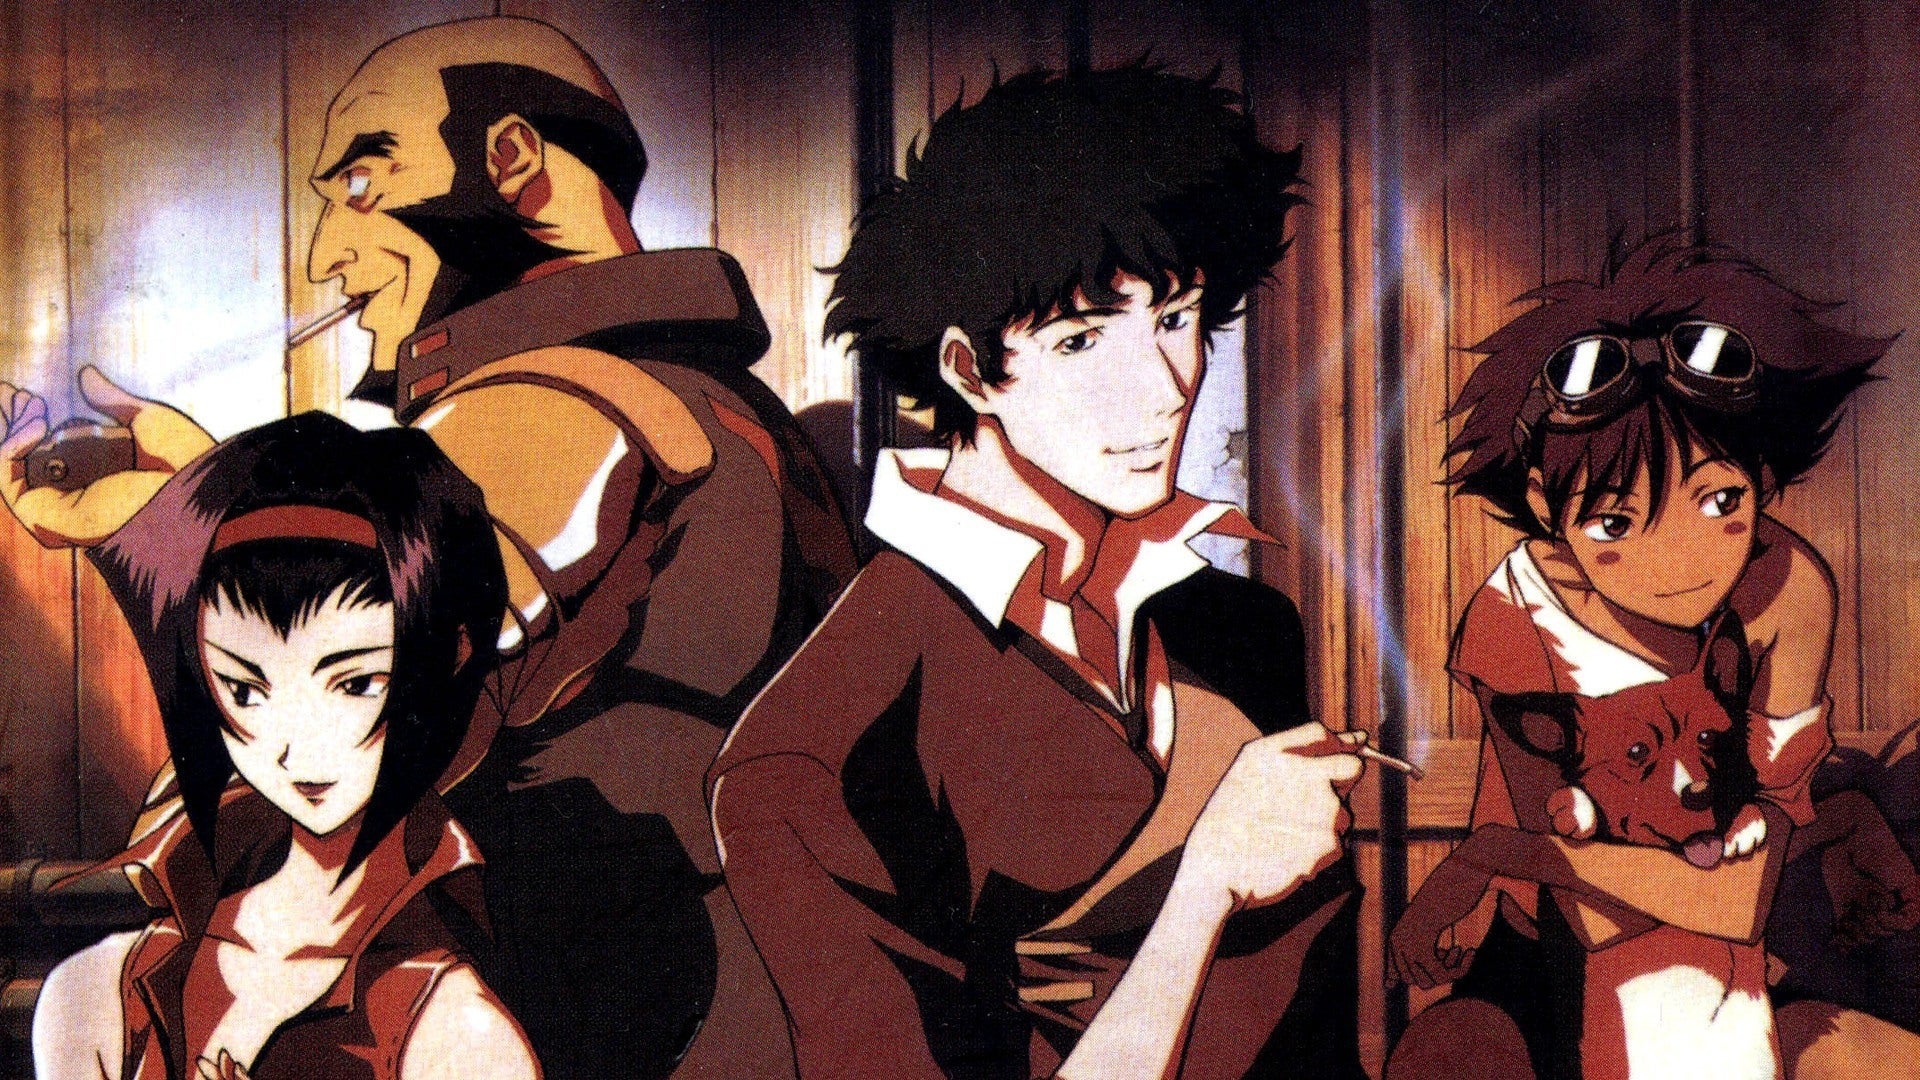 Cowboy Bebop will also have a Roleplaying Game